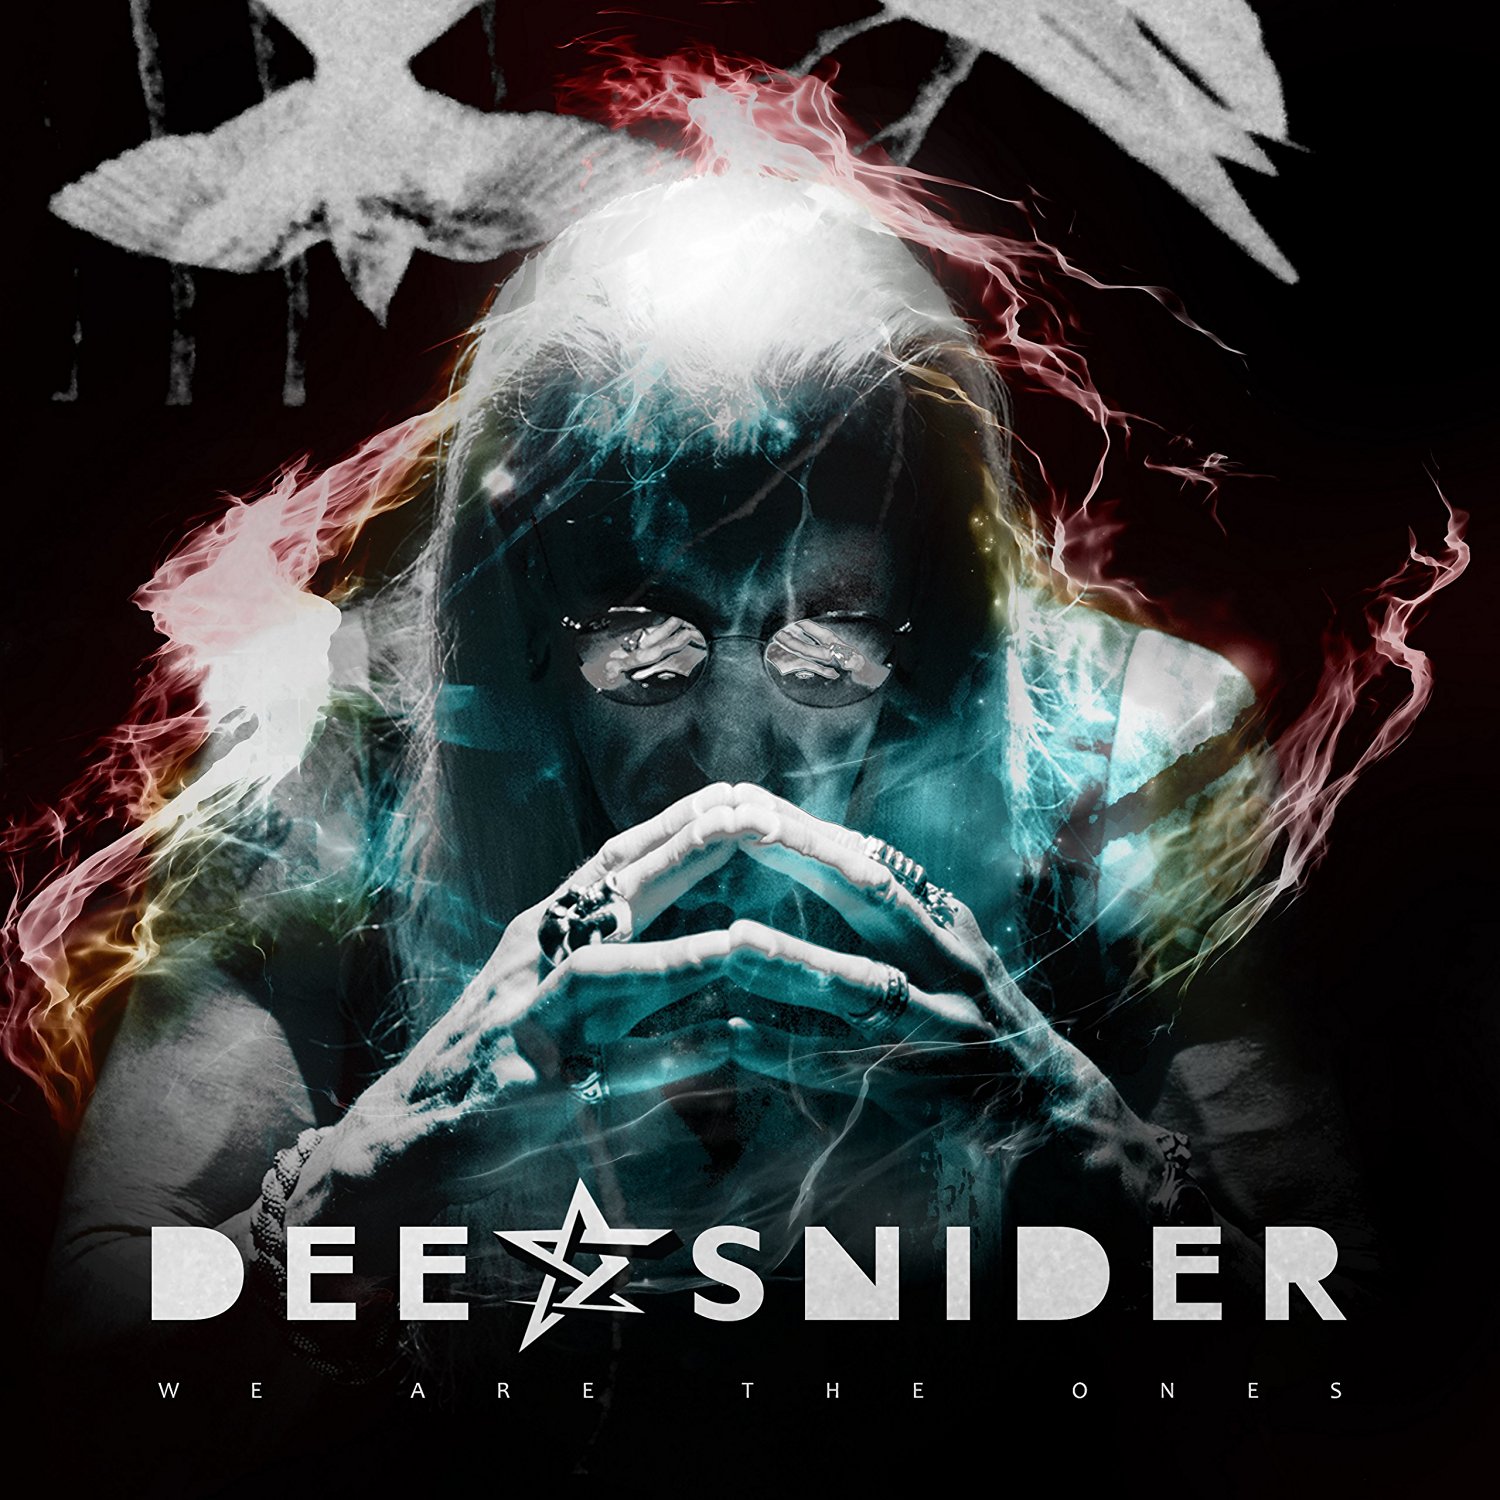 Dee Snider Returns With his Latest Solo Album, We Are the Ones!